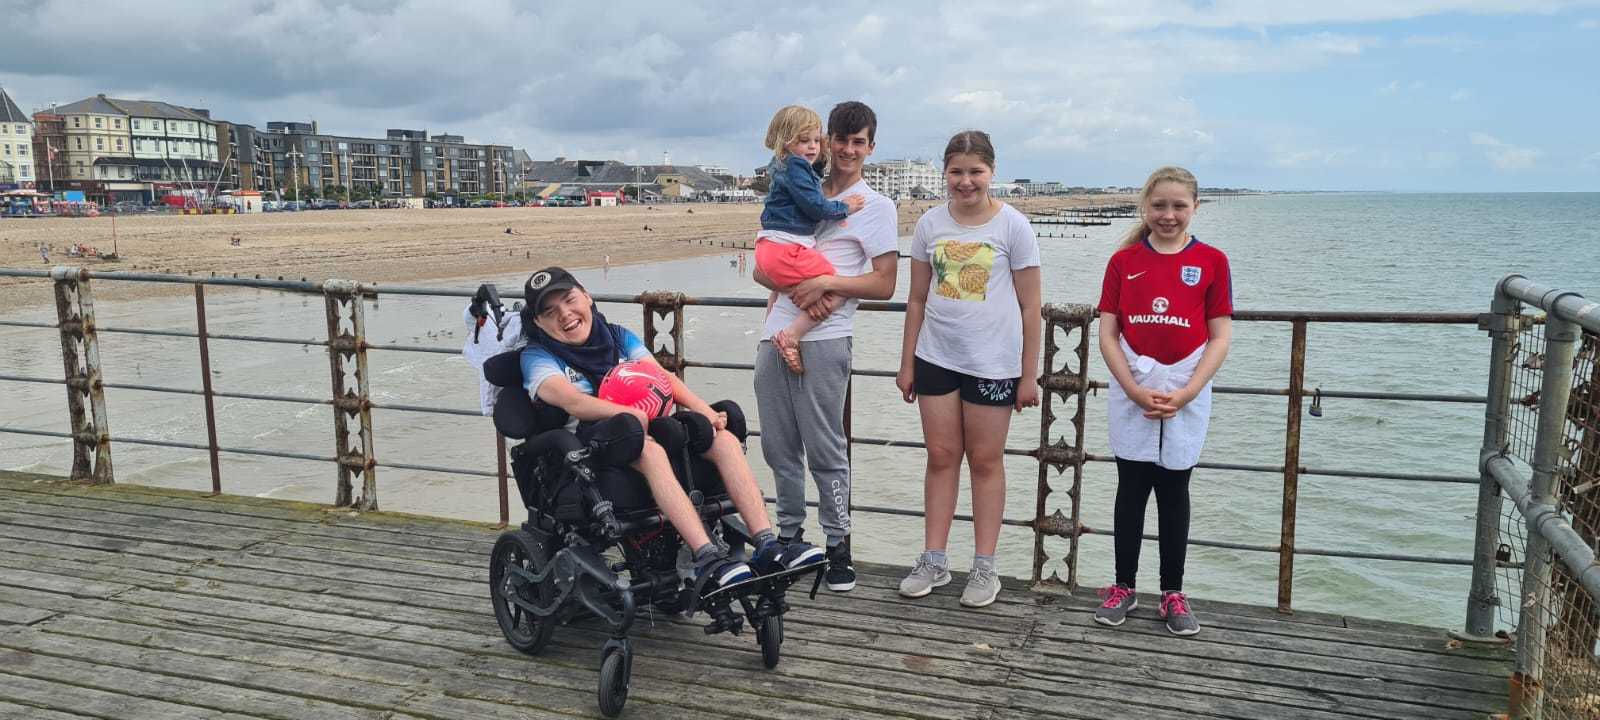 The Merry family enjoying a day out on the pier at Bognor Regis. George was able to access the whole pier area in his wheelchair!